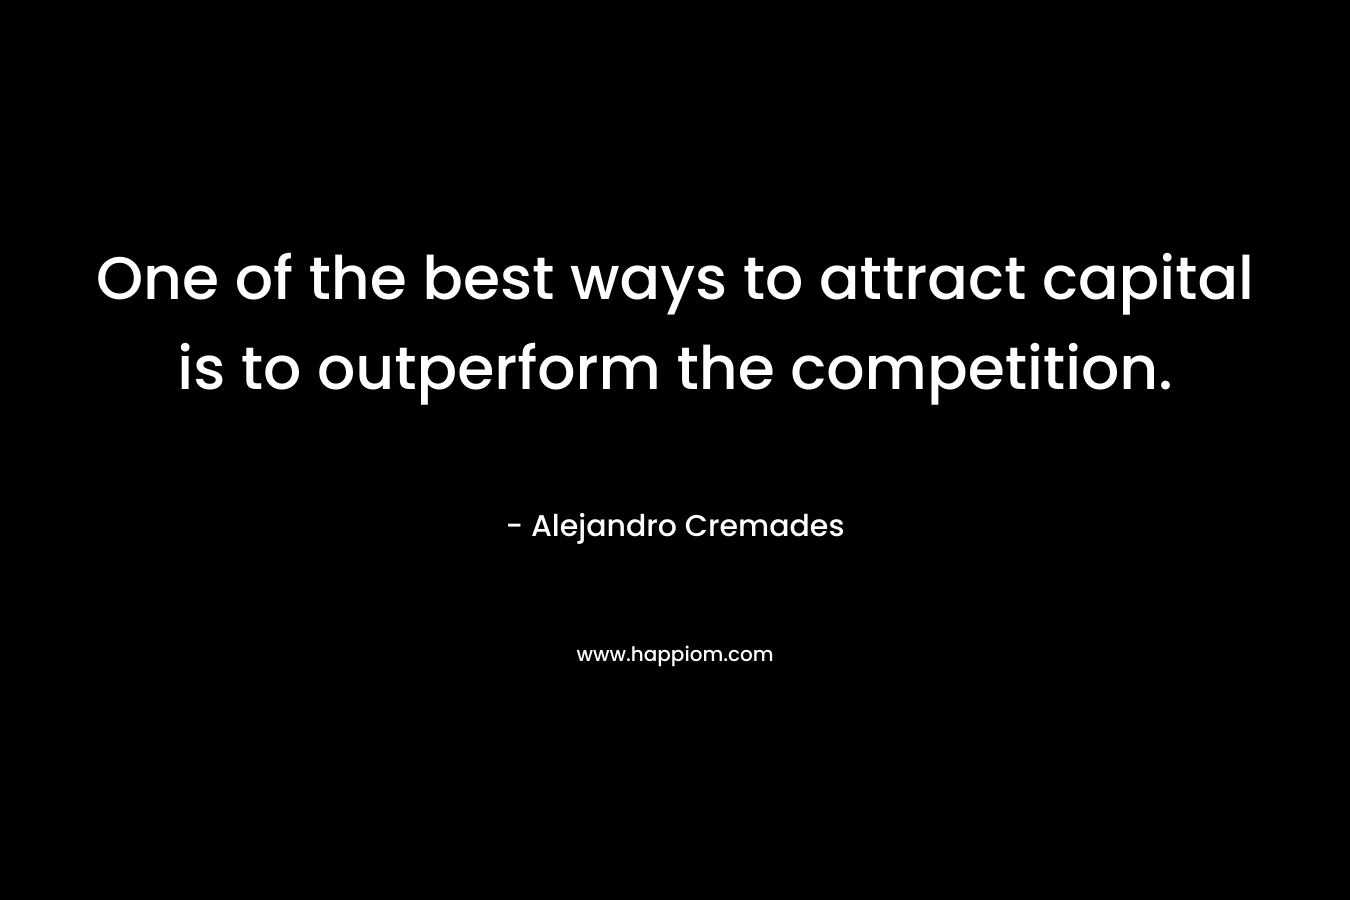 One of the best ways to attract capital is to outperform the competition. – Alejandro Cremades